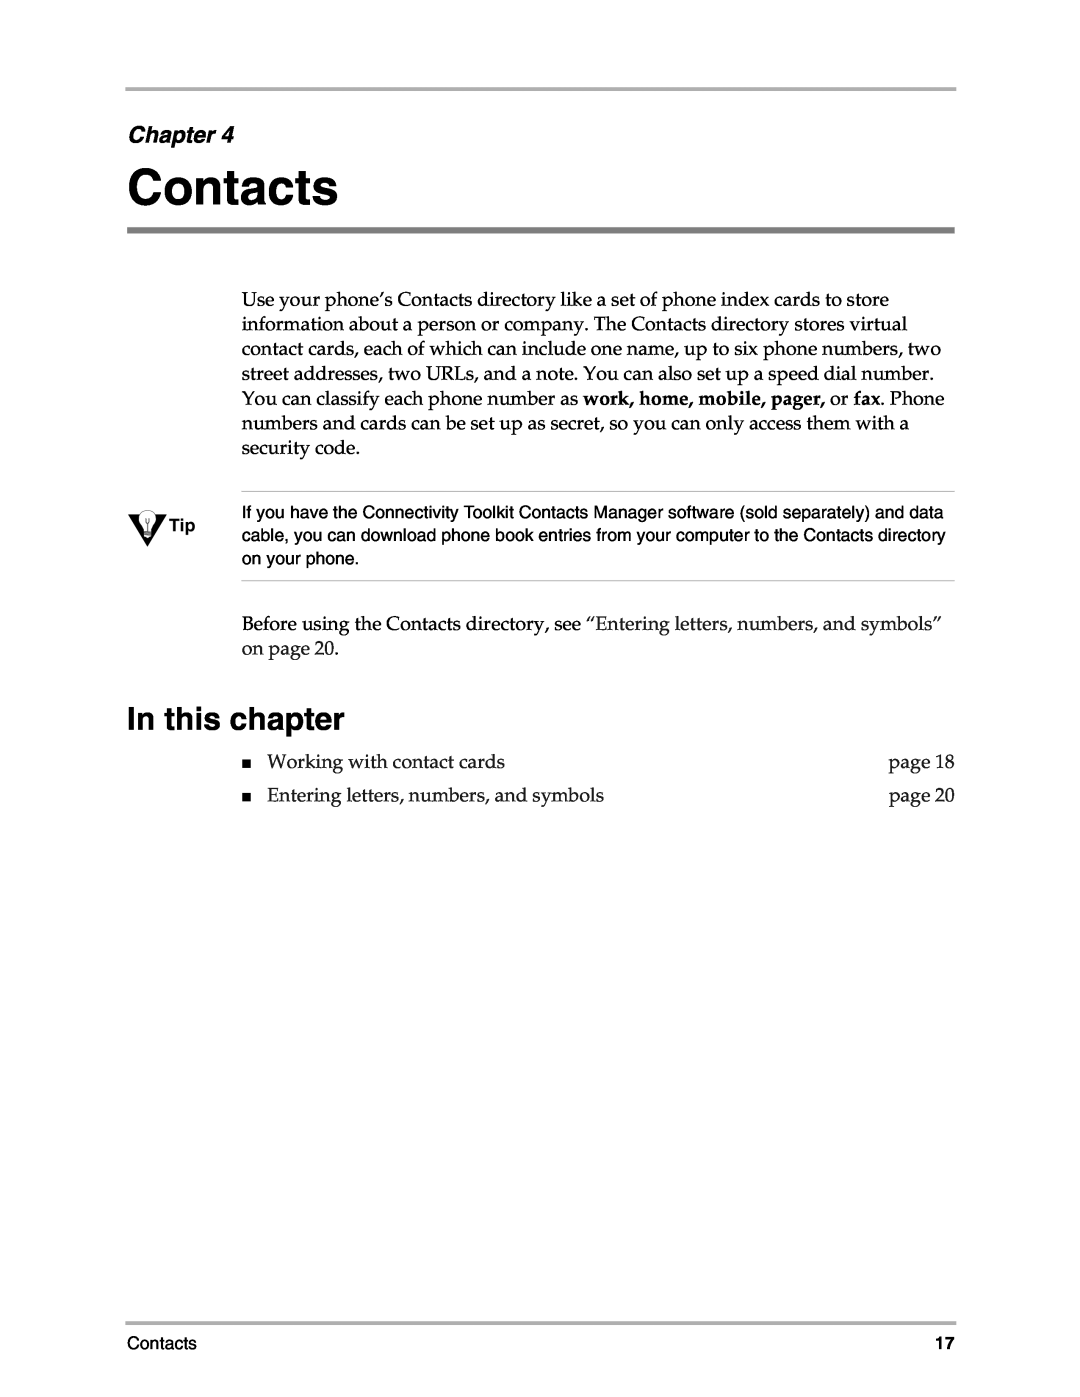 Kyocera 3035 Contacts, In this chapter, Chapter, Working with contact cards, page, Entering letters, numbers, and symbols 